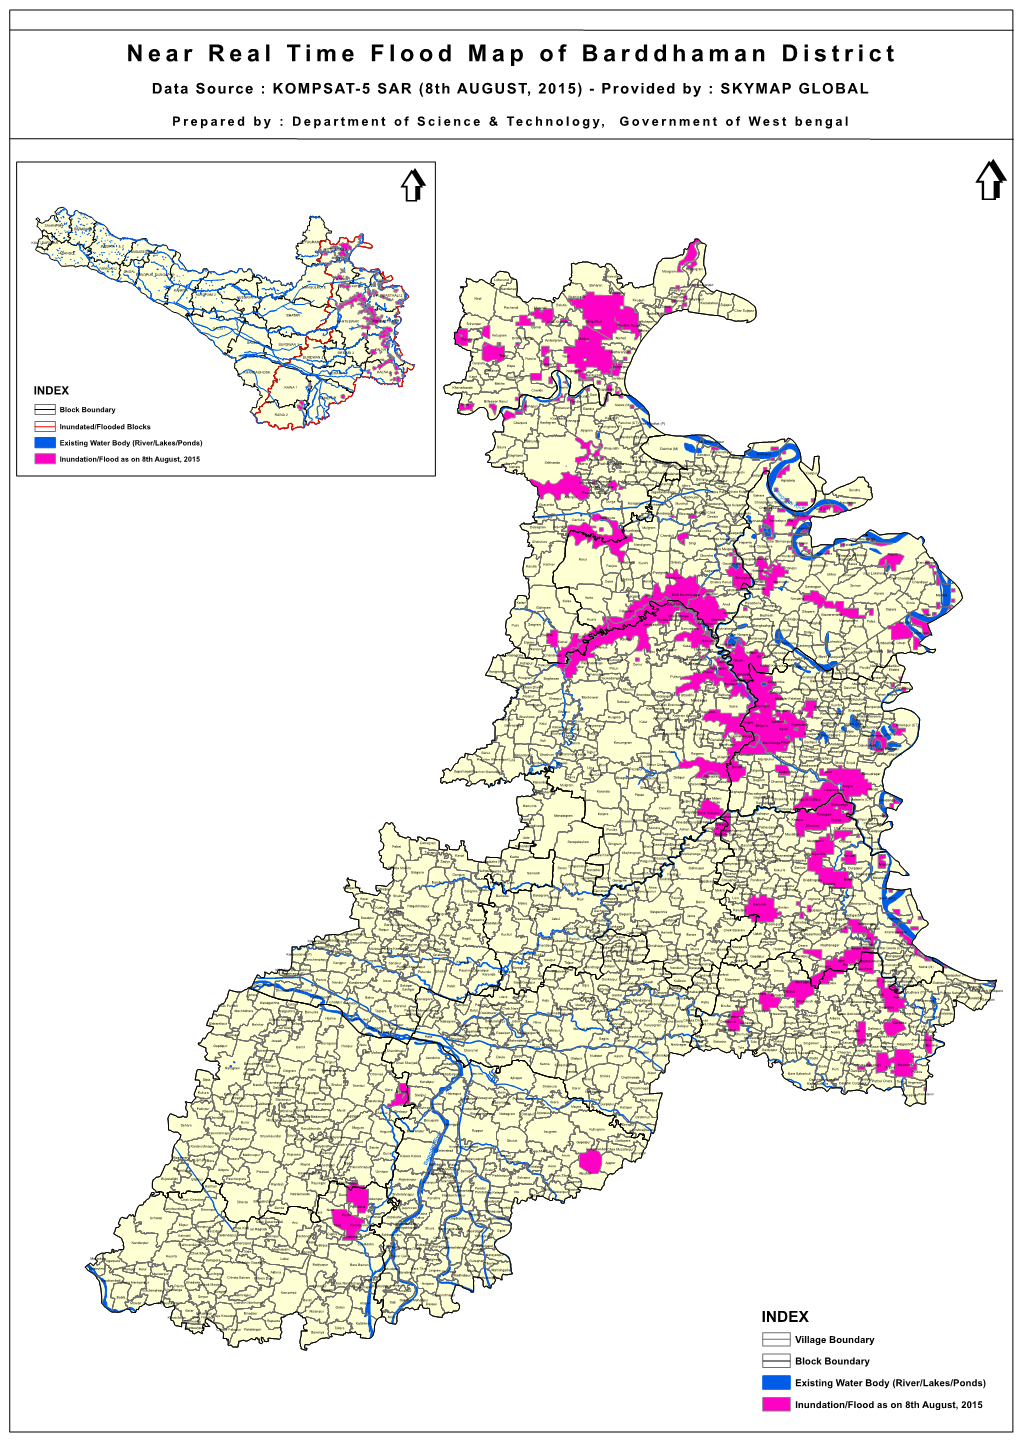 Near Real Time Flood Map of Barddhaman District